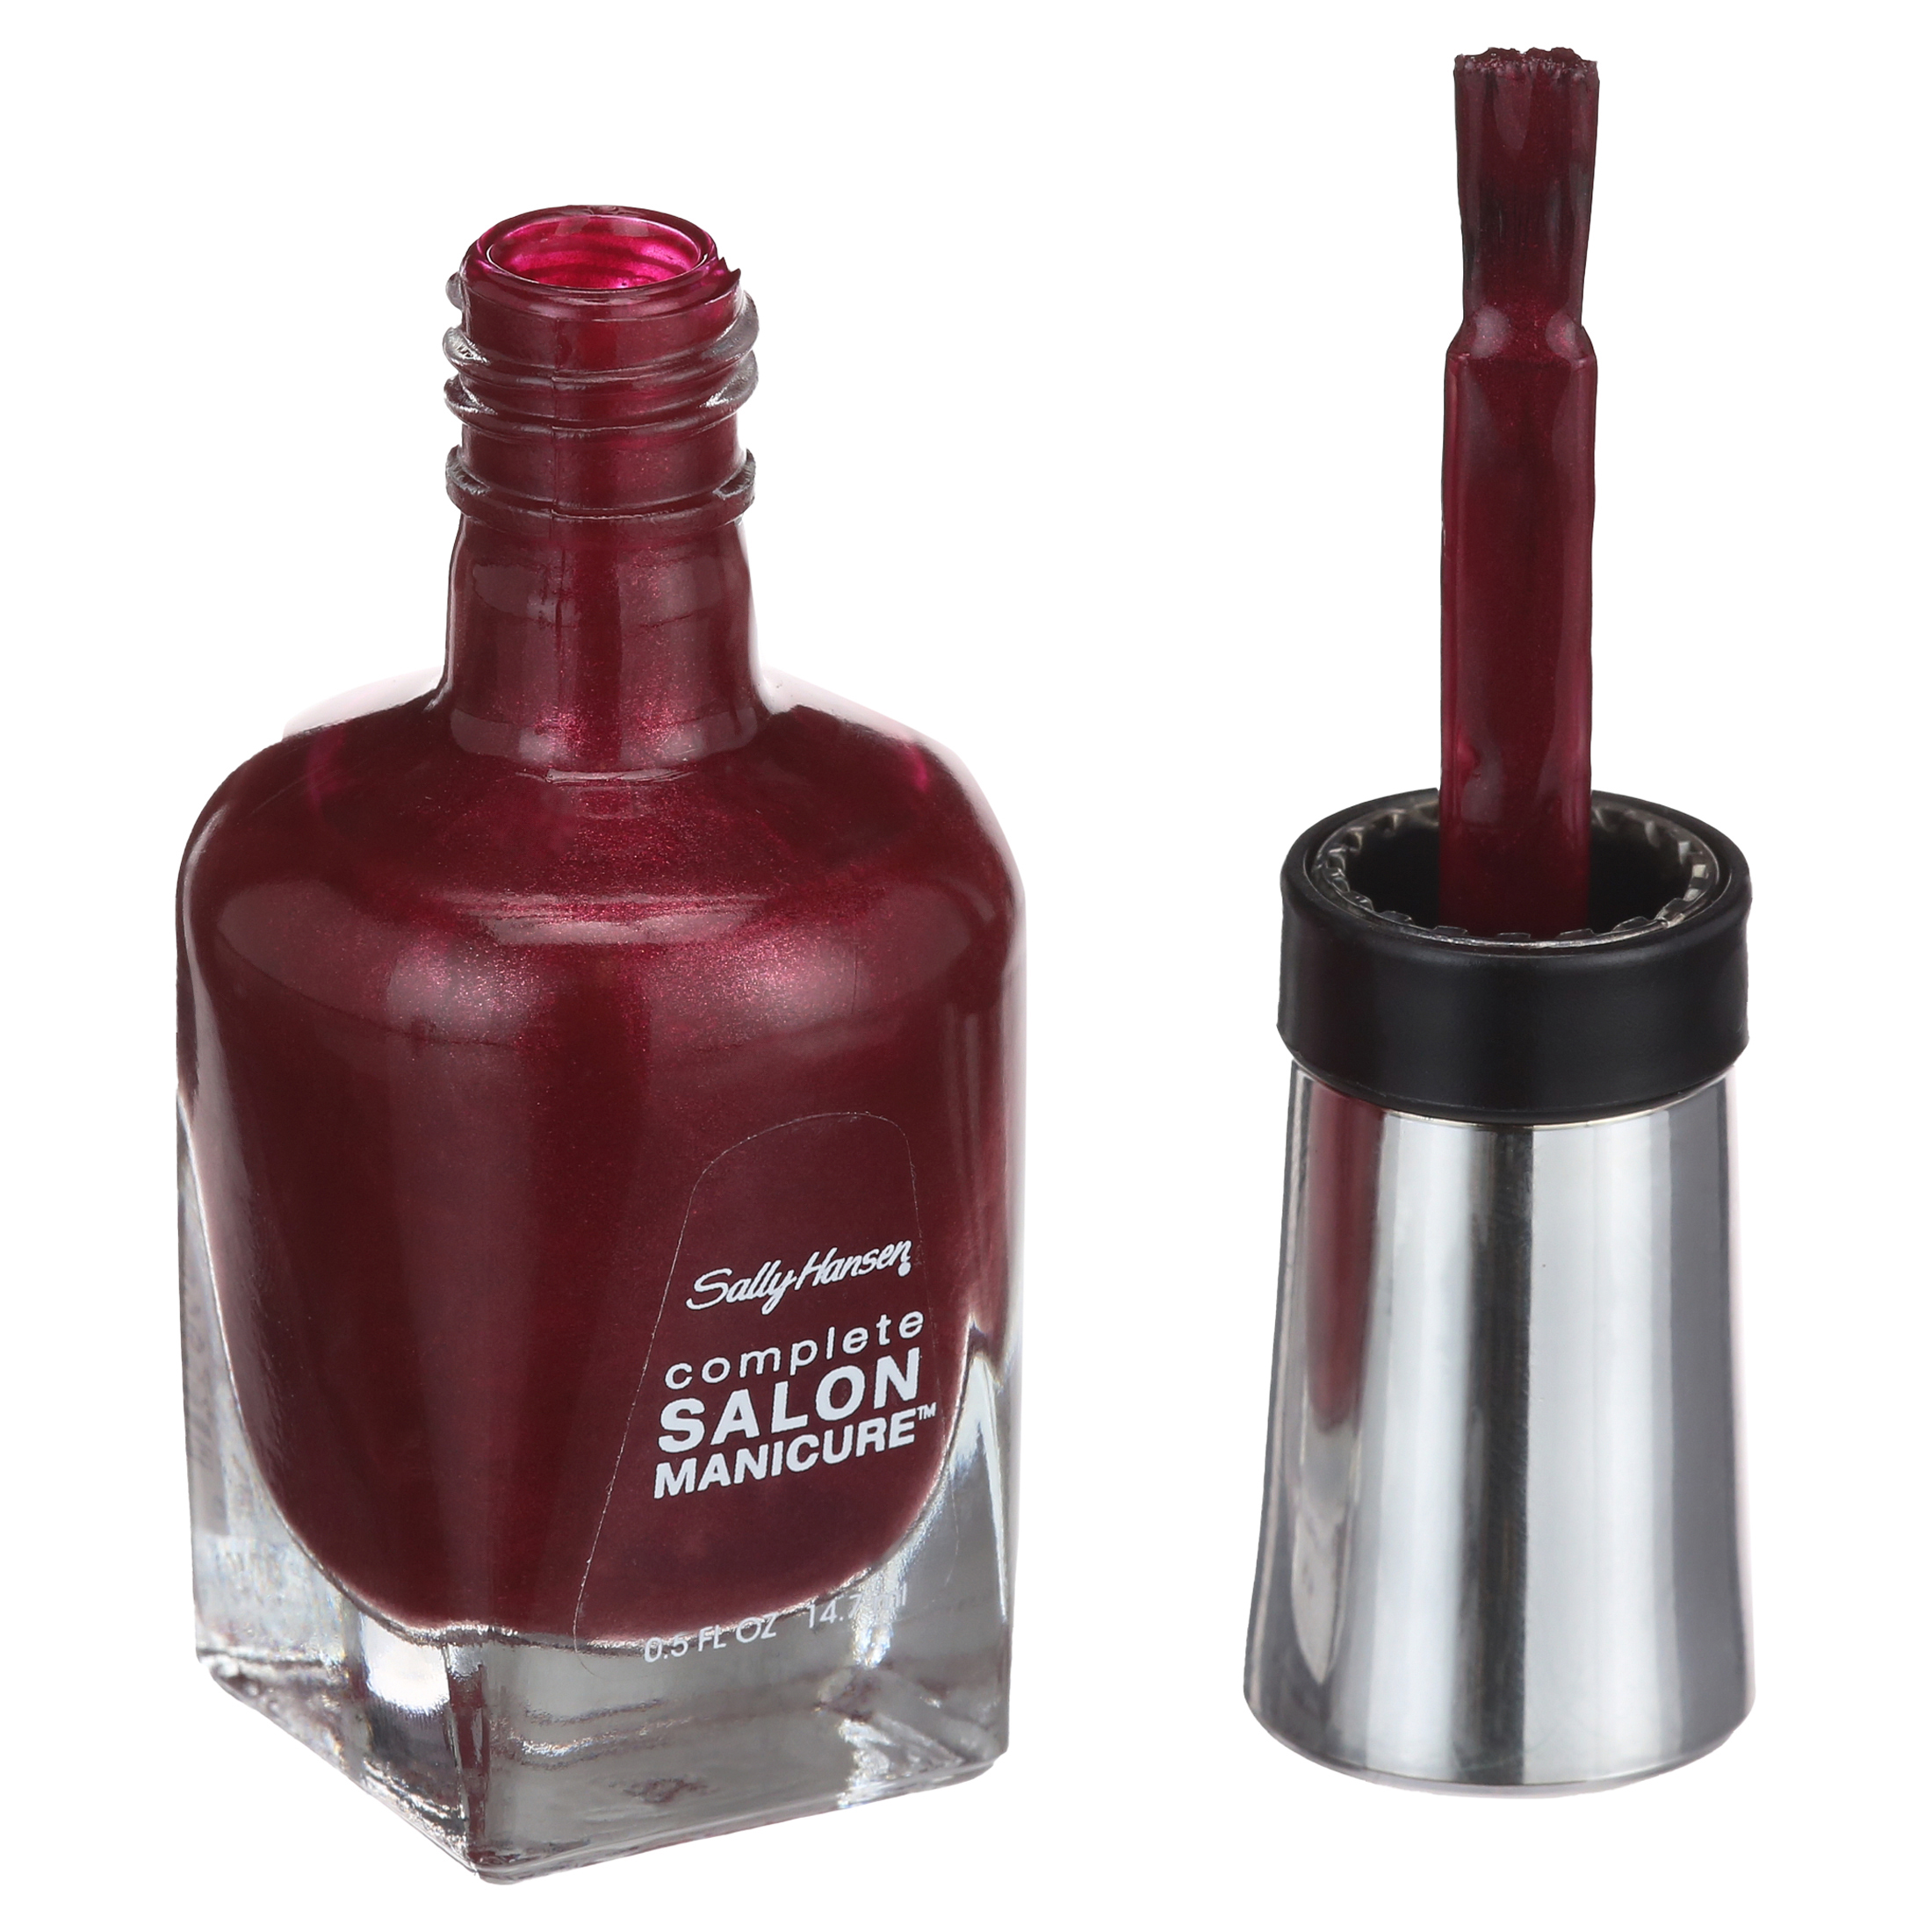 Sally Hansen Complete Salon Manicure Nail Color, Wine Not - image 7 of 8